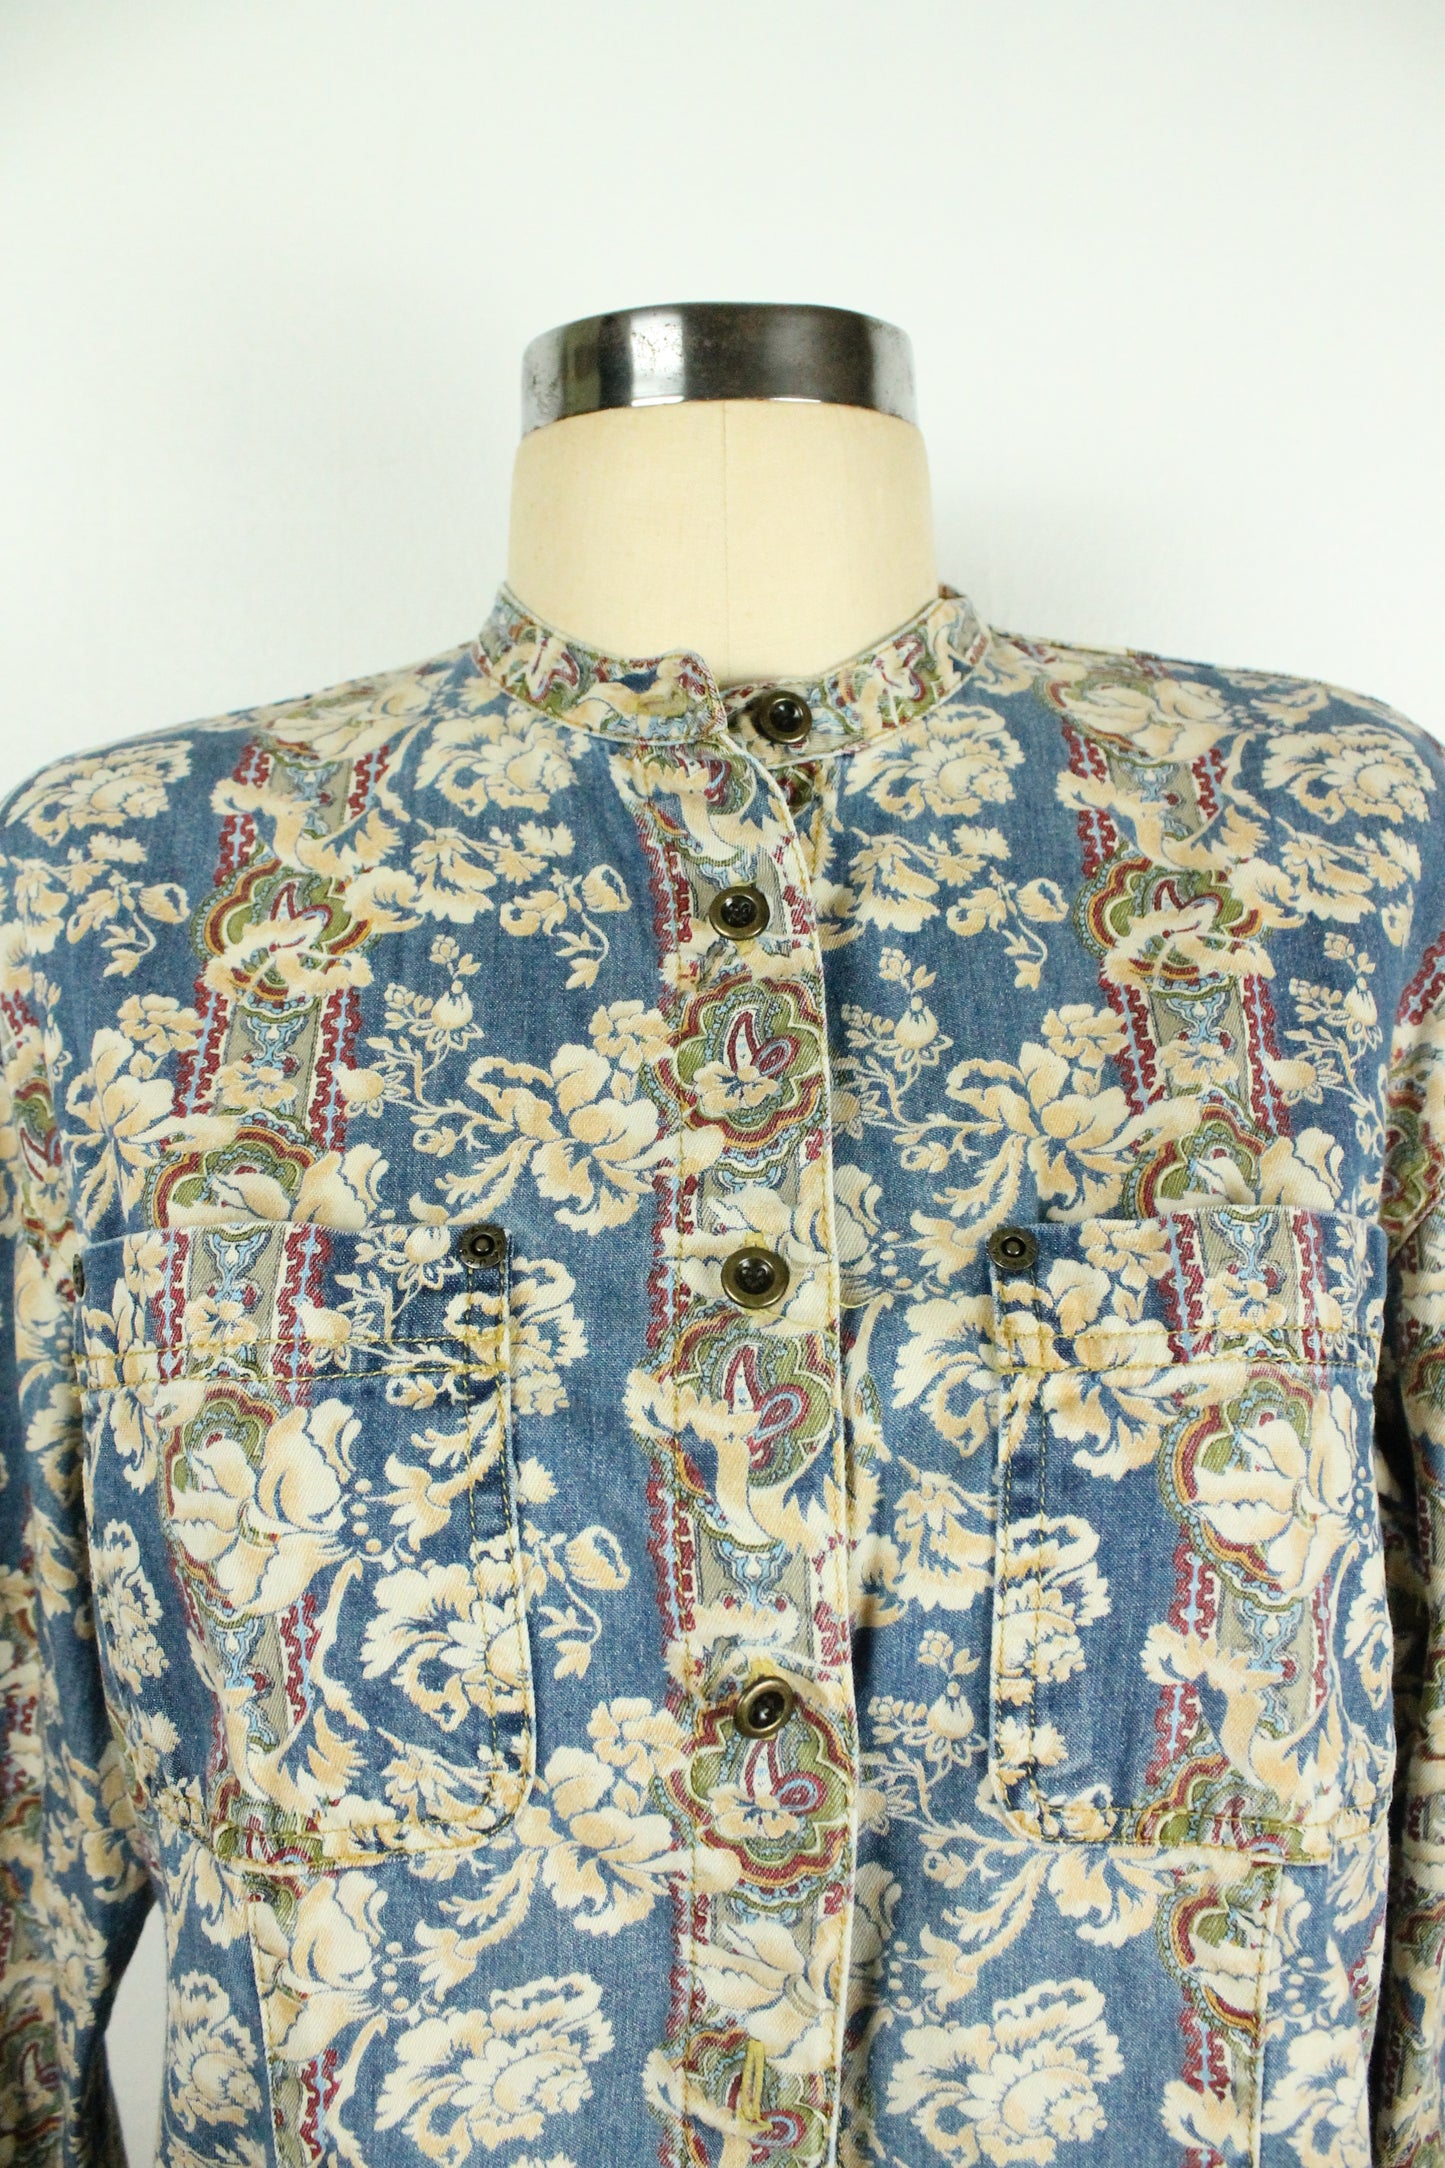 90s Floral Chambray Button-Up